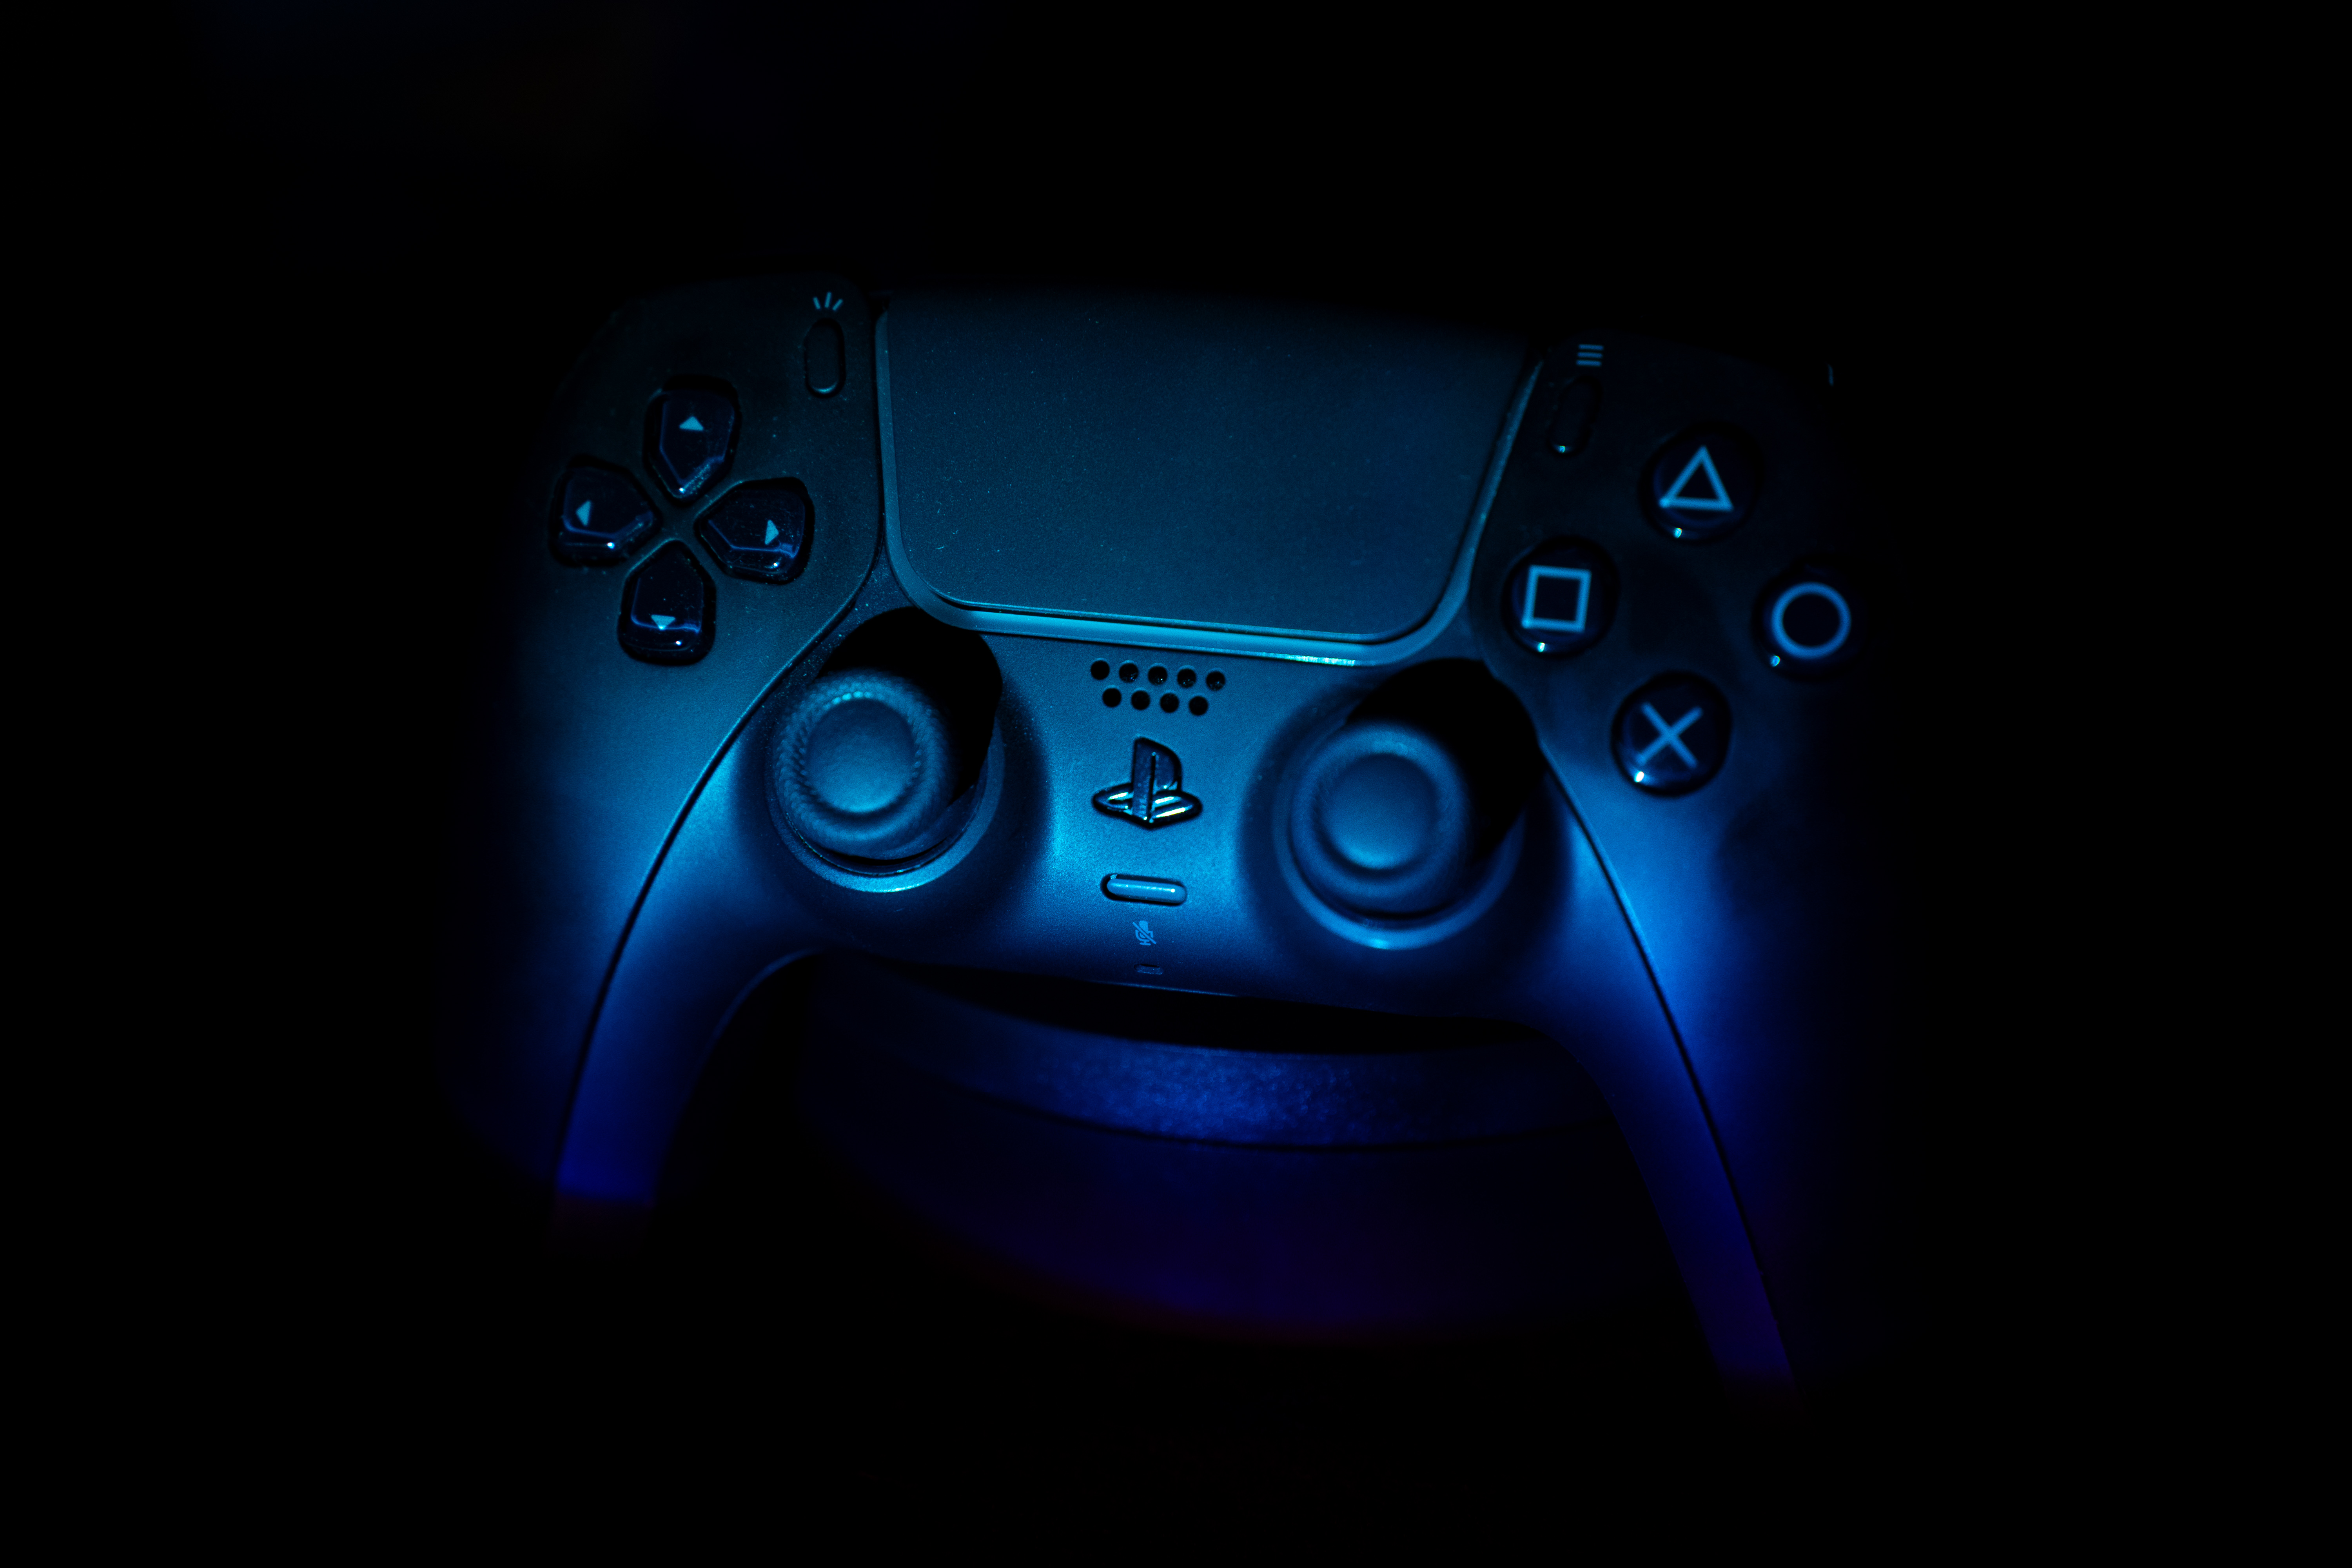 A Midnight Black DualSense wireless gaming controller is being displayed for the PS5 console.